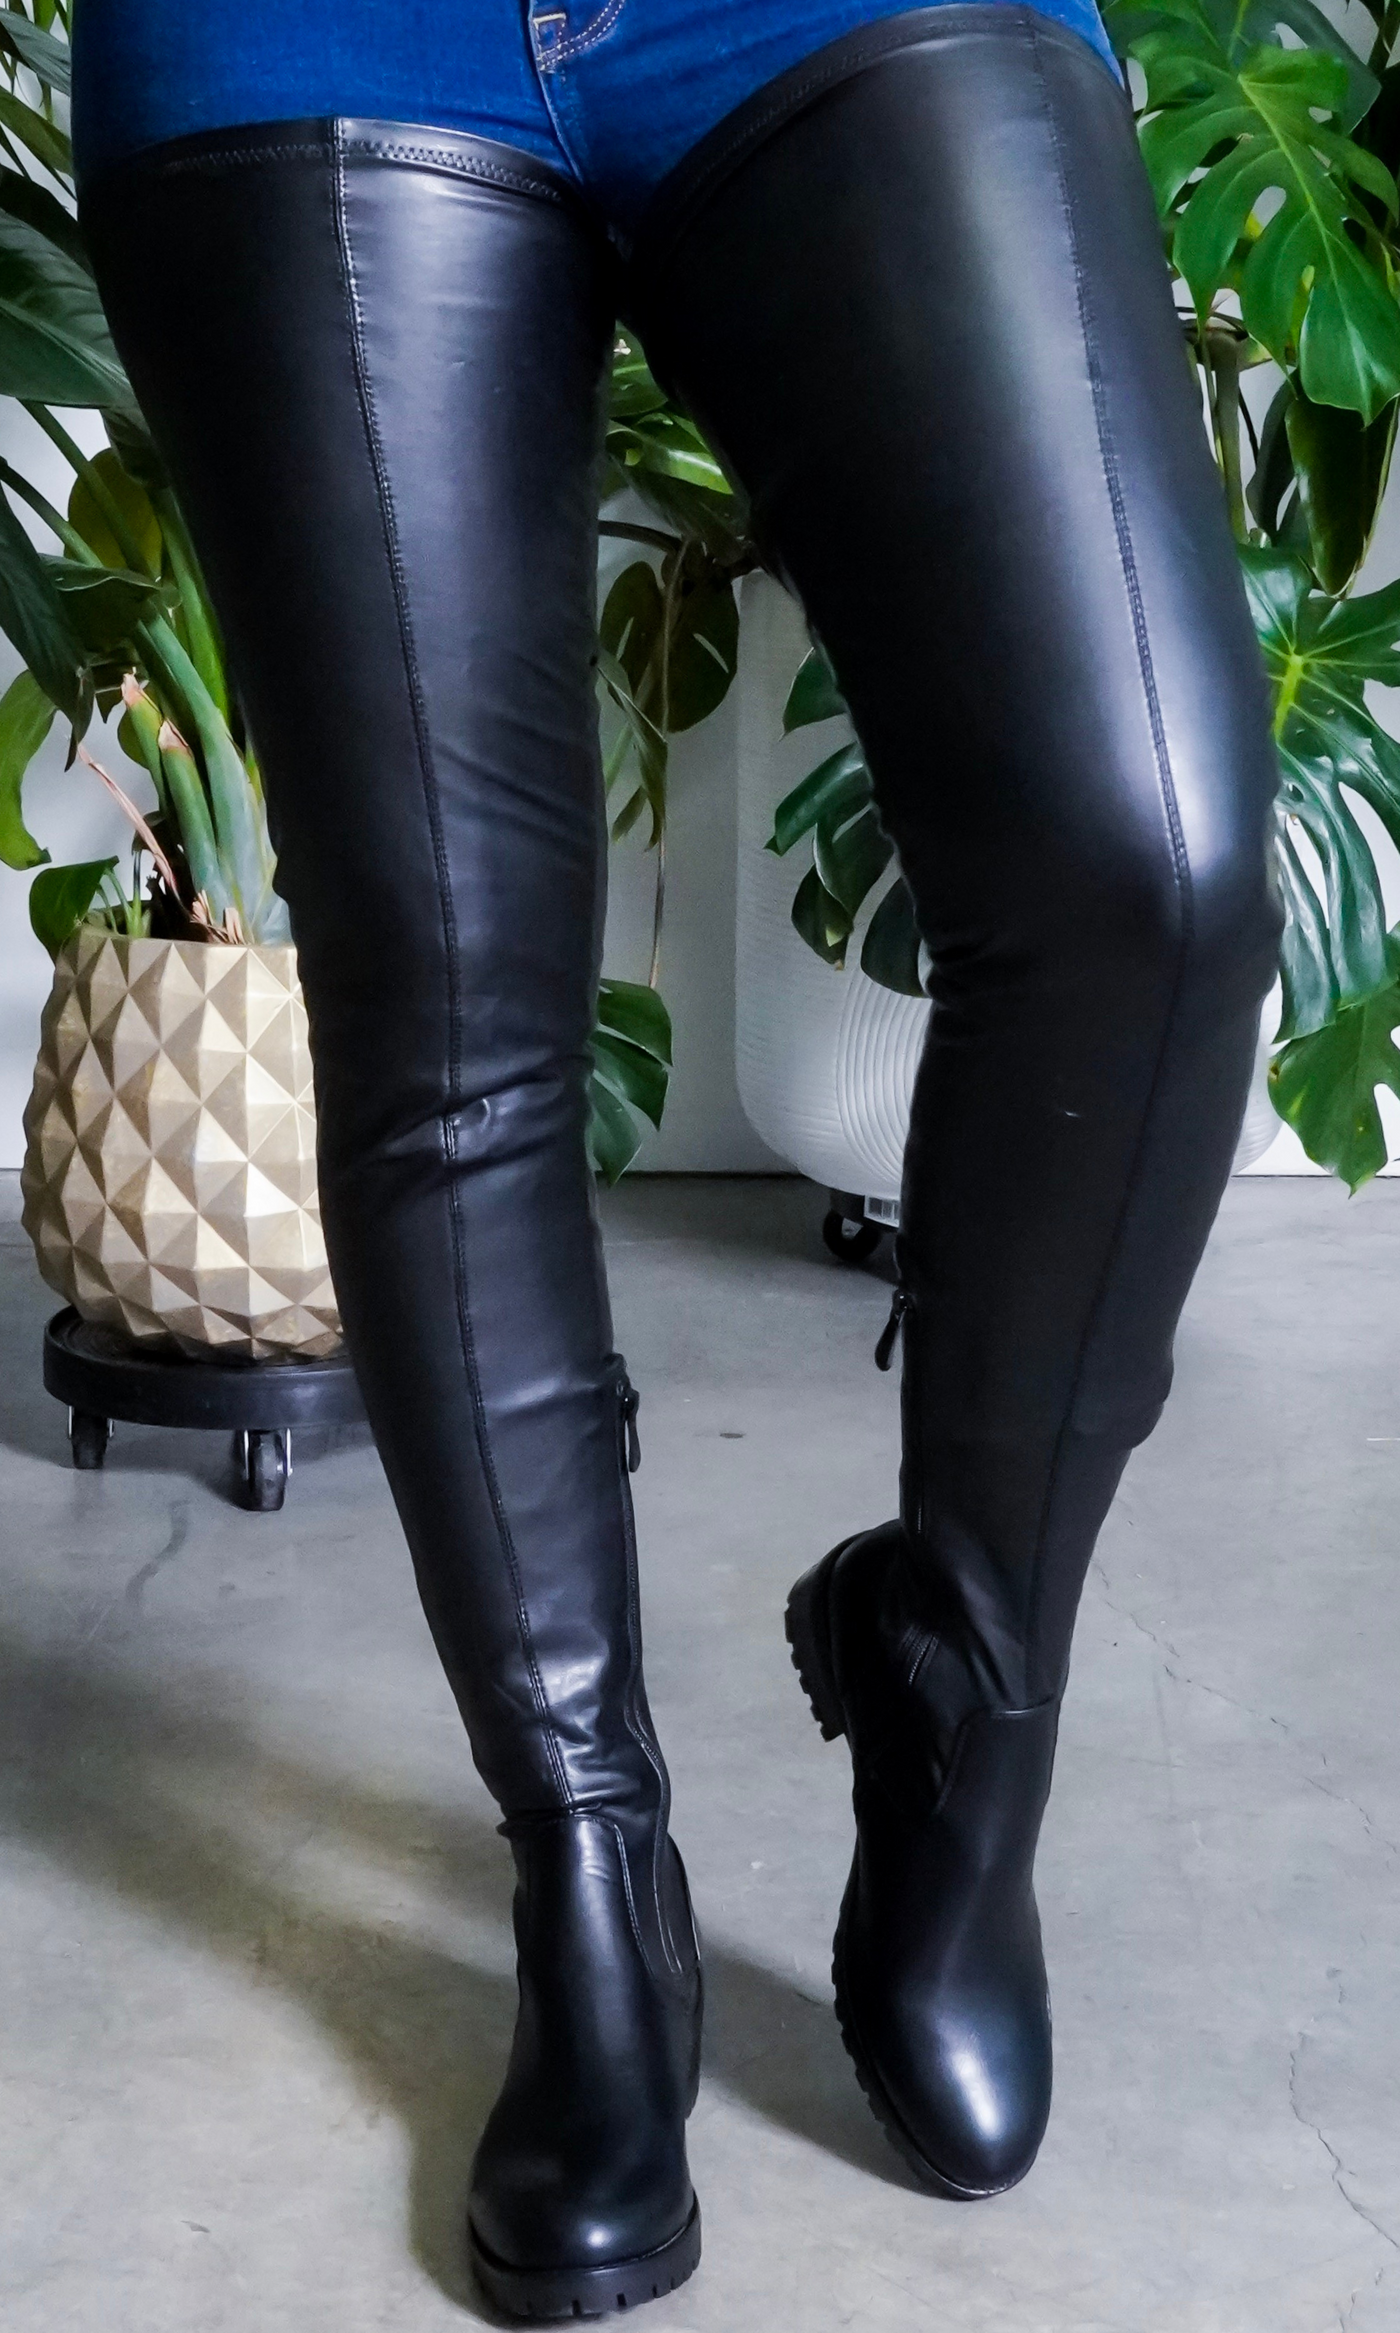 She's Killing It Surgical | Thigh High Flat Stretch Boots - Cutely Covered